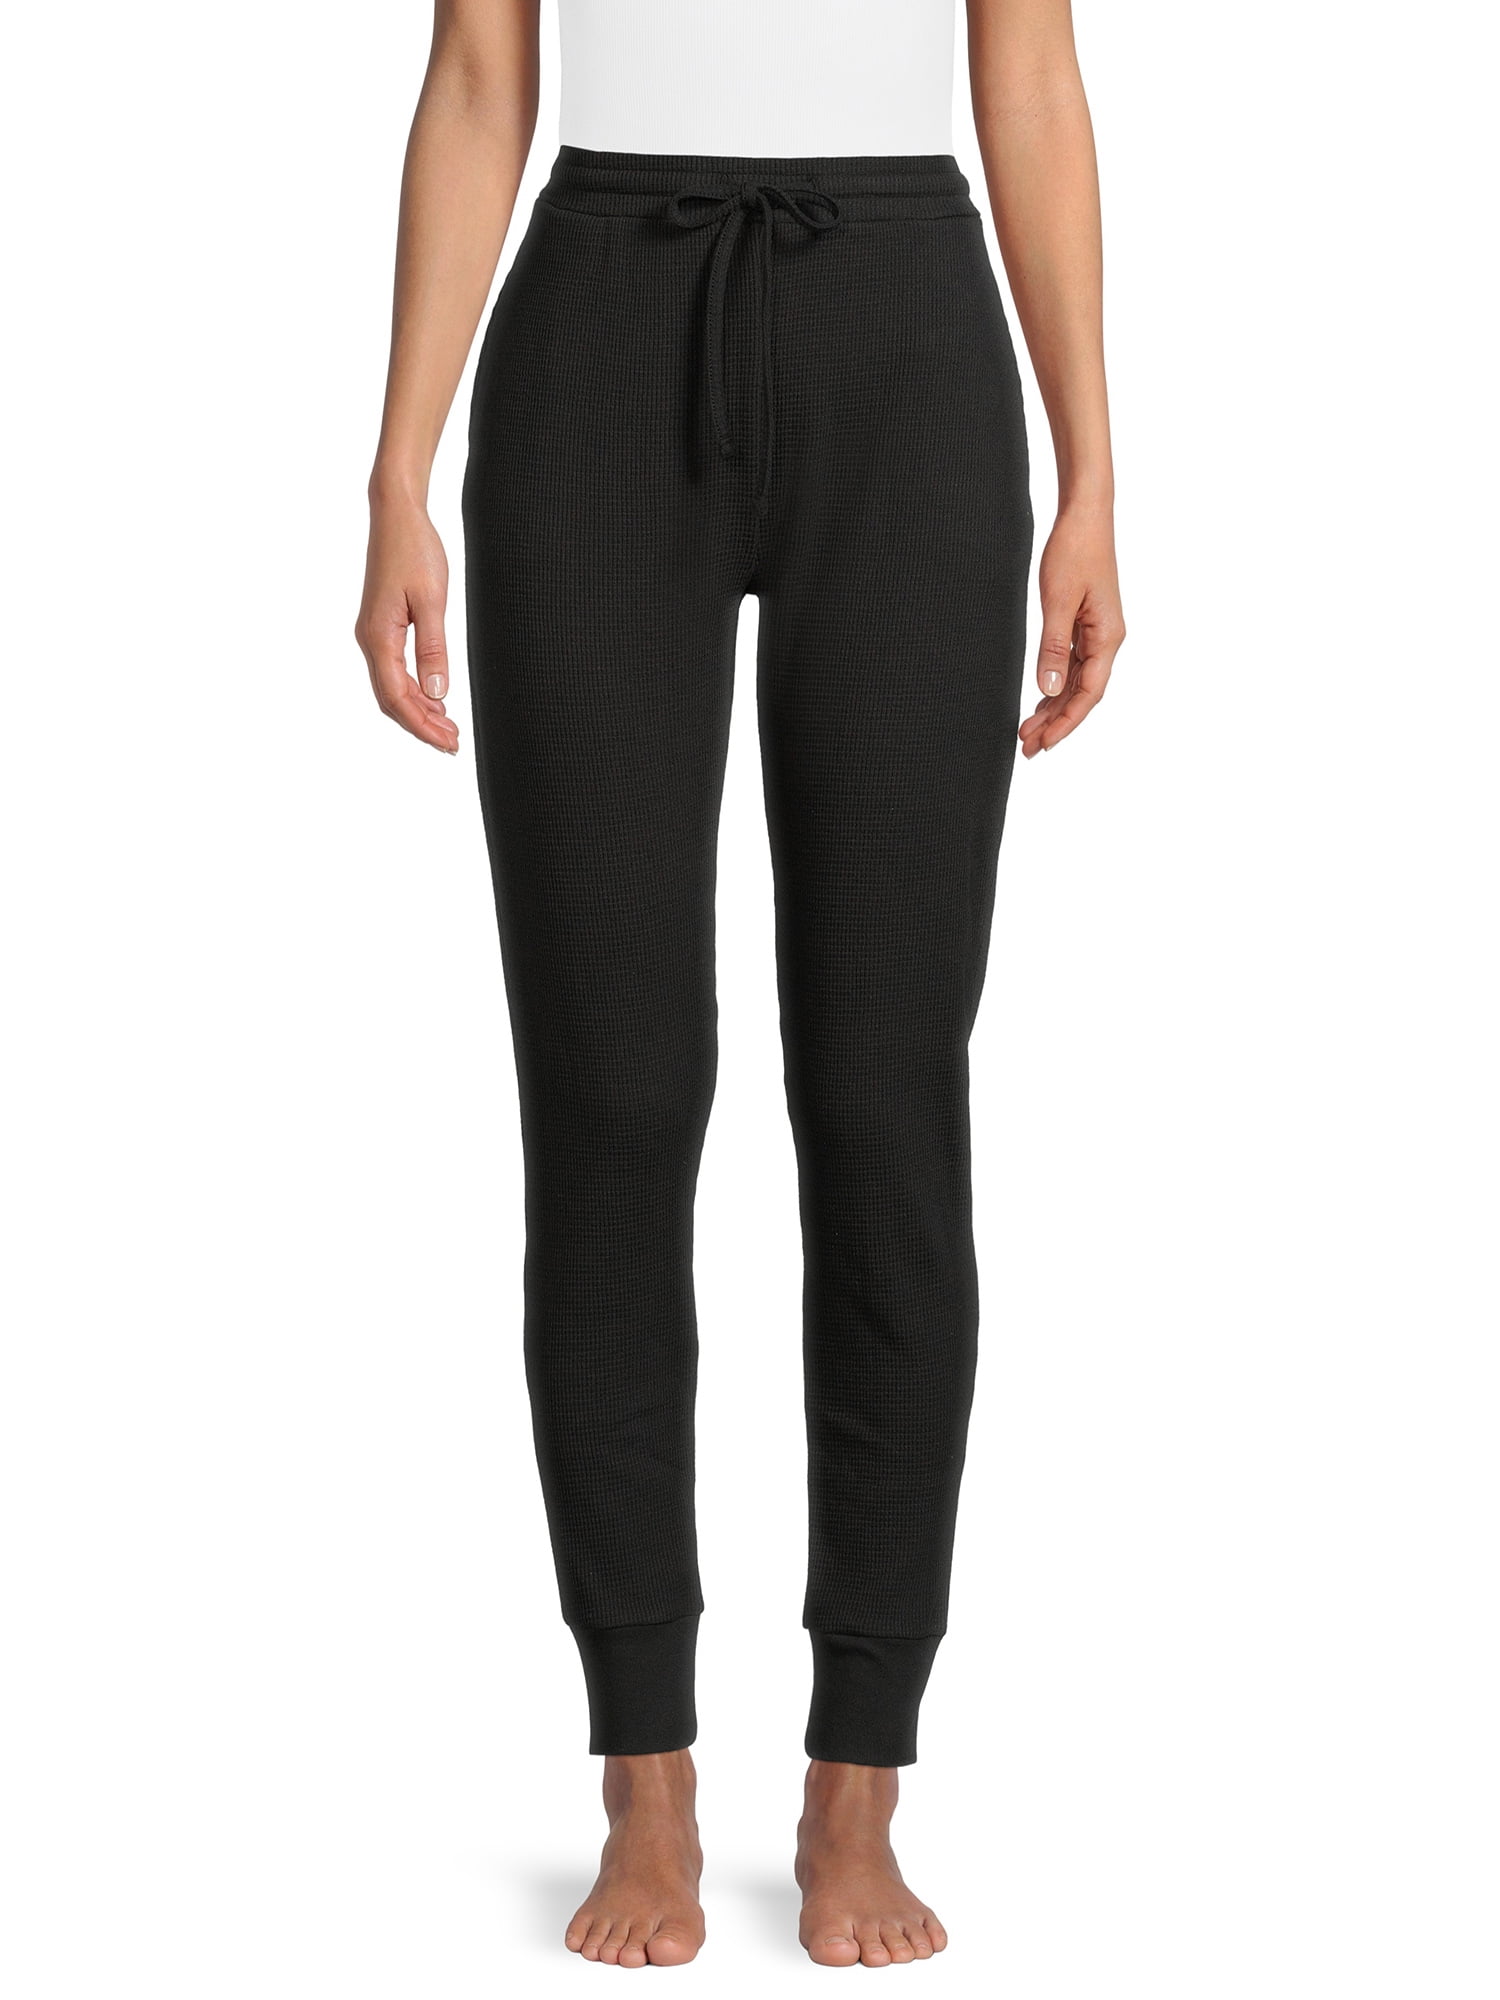 Hanes Women's Relaxed Fit Waffle Knit Thermal Jogger Pants - Walmart.com